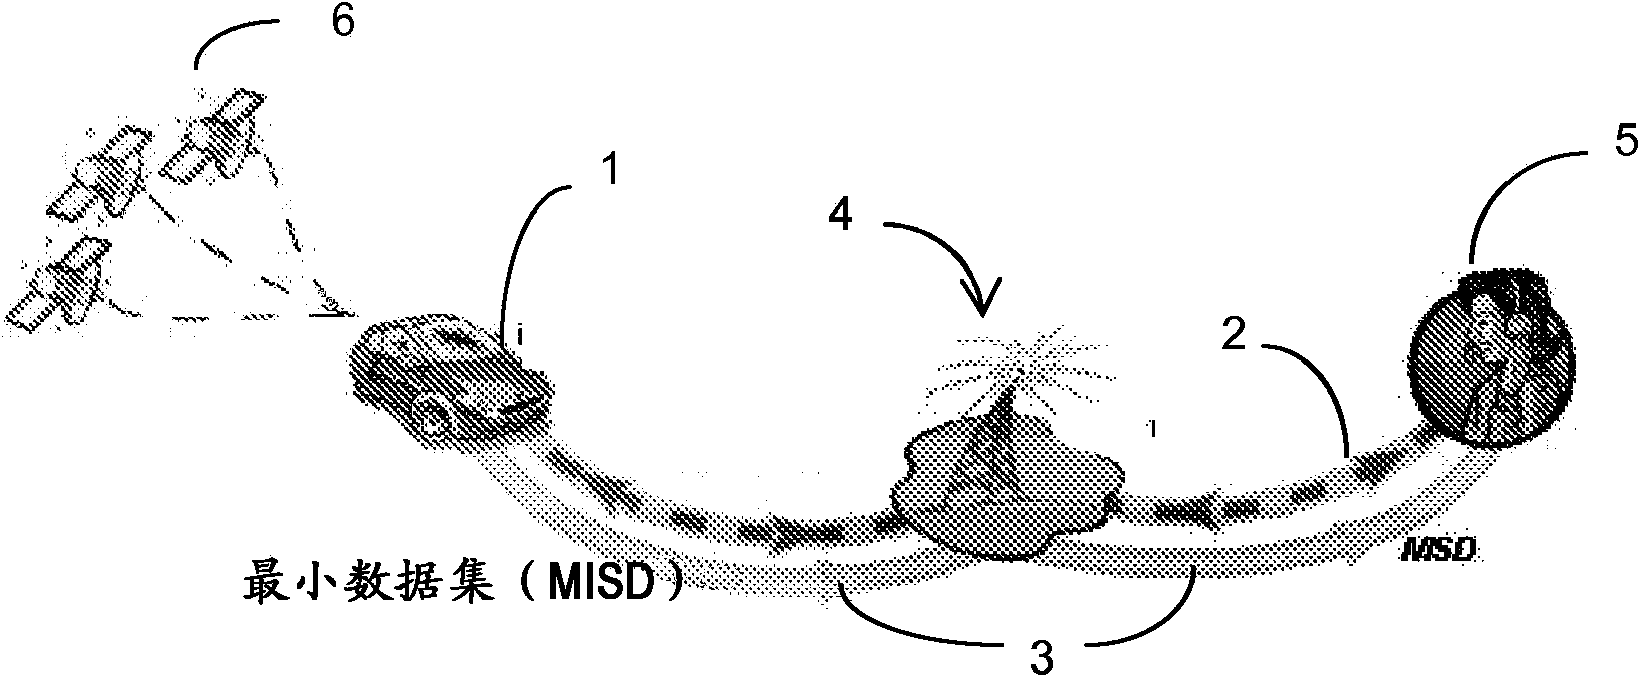 Method and processing system for attempting an emergency call by a wireless device